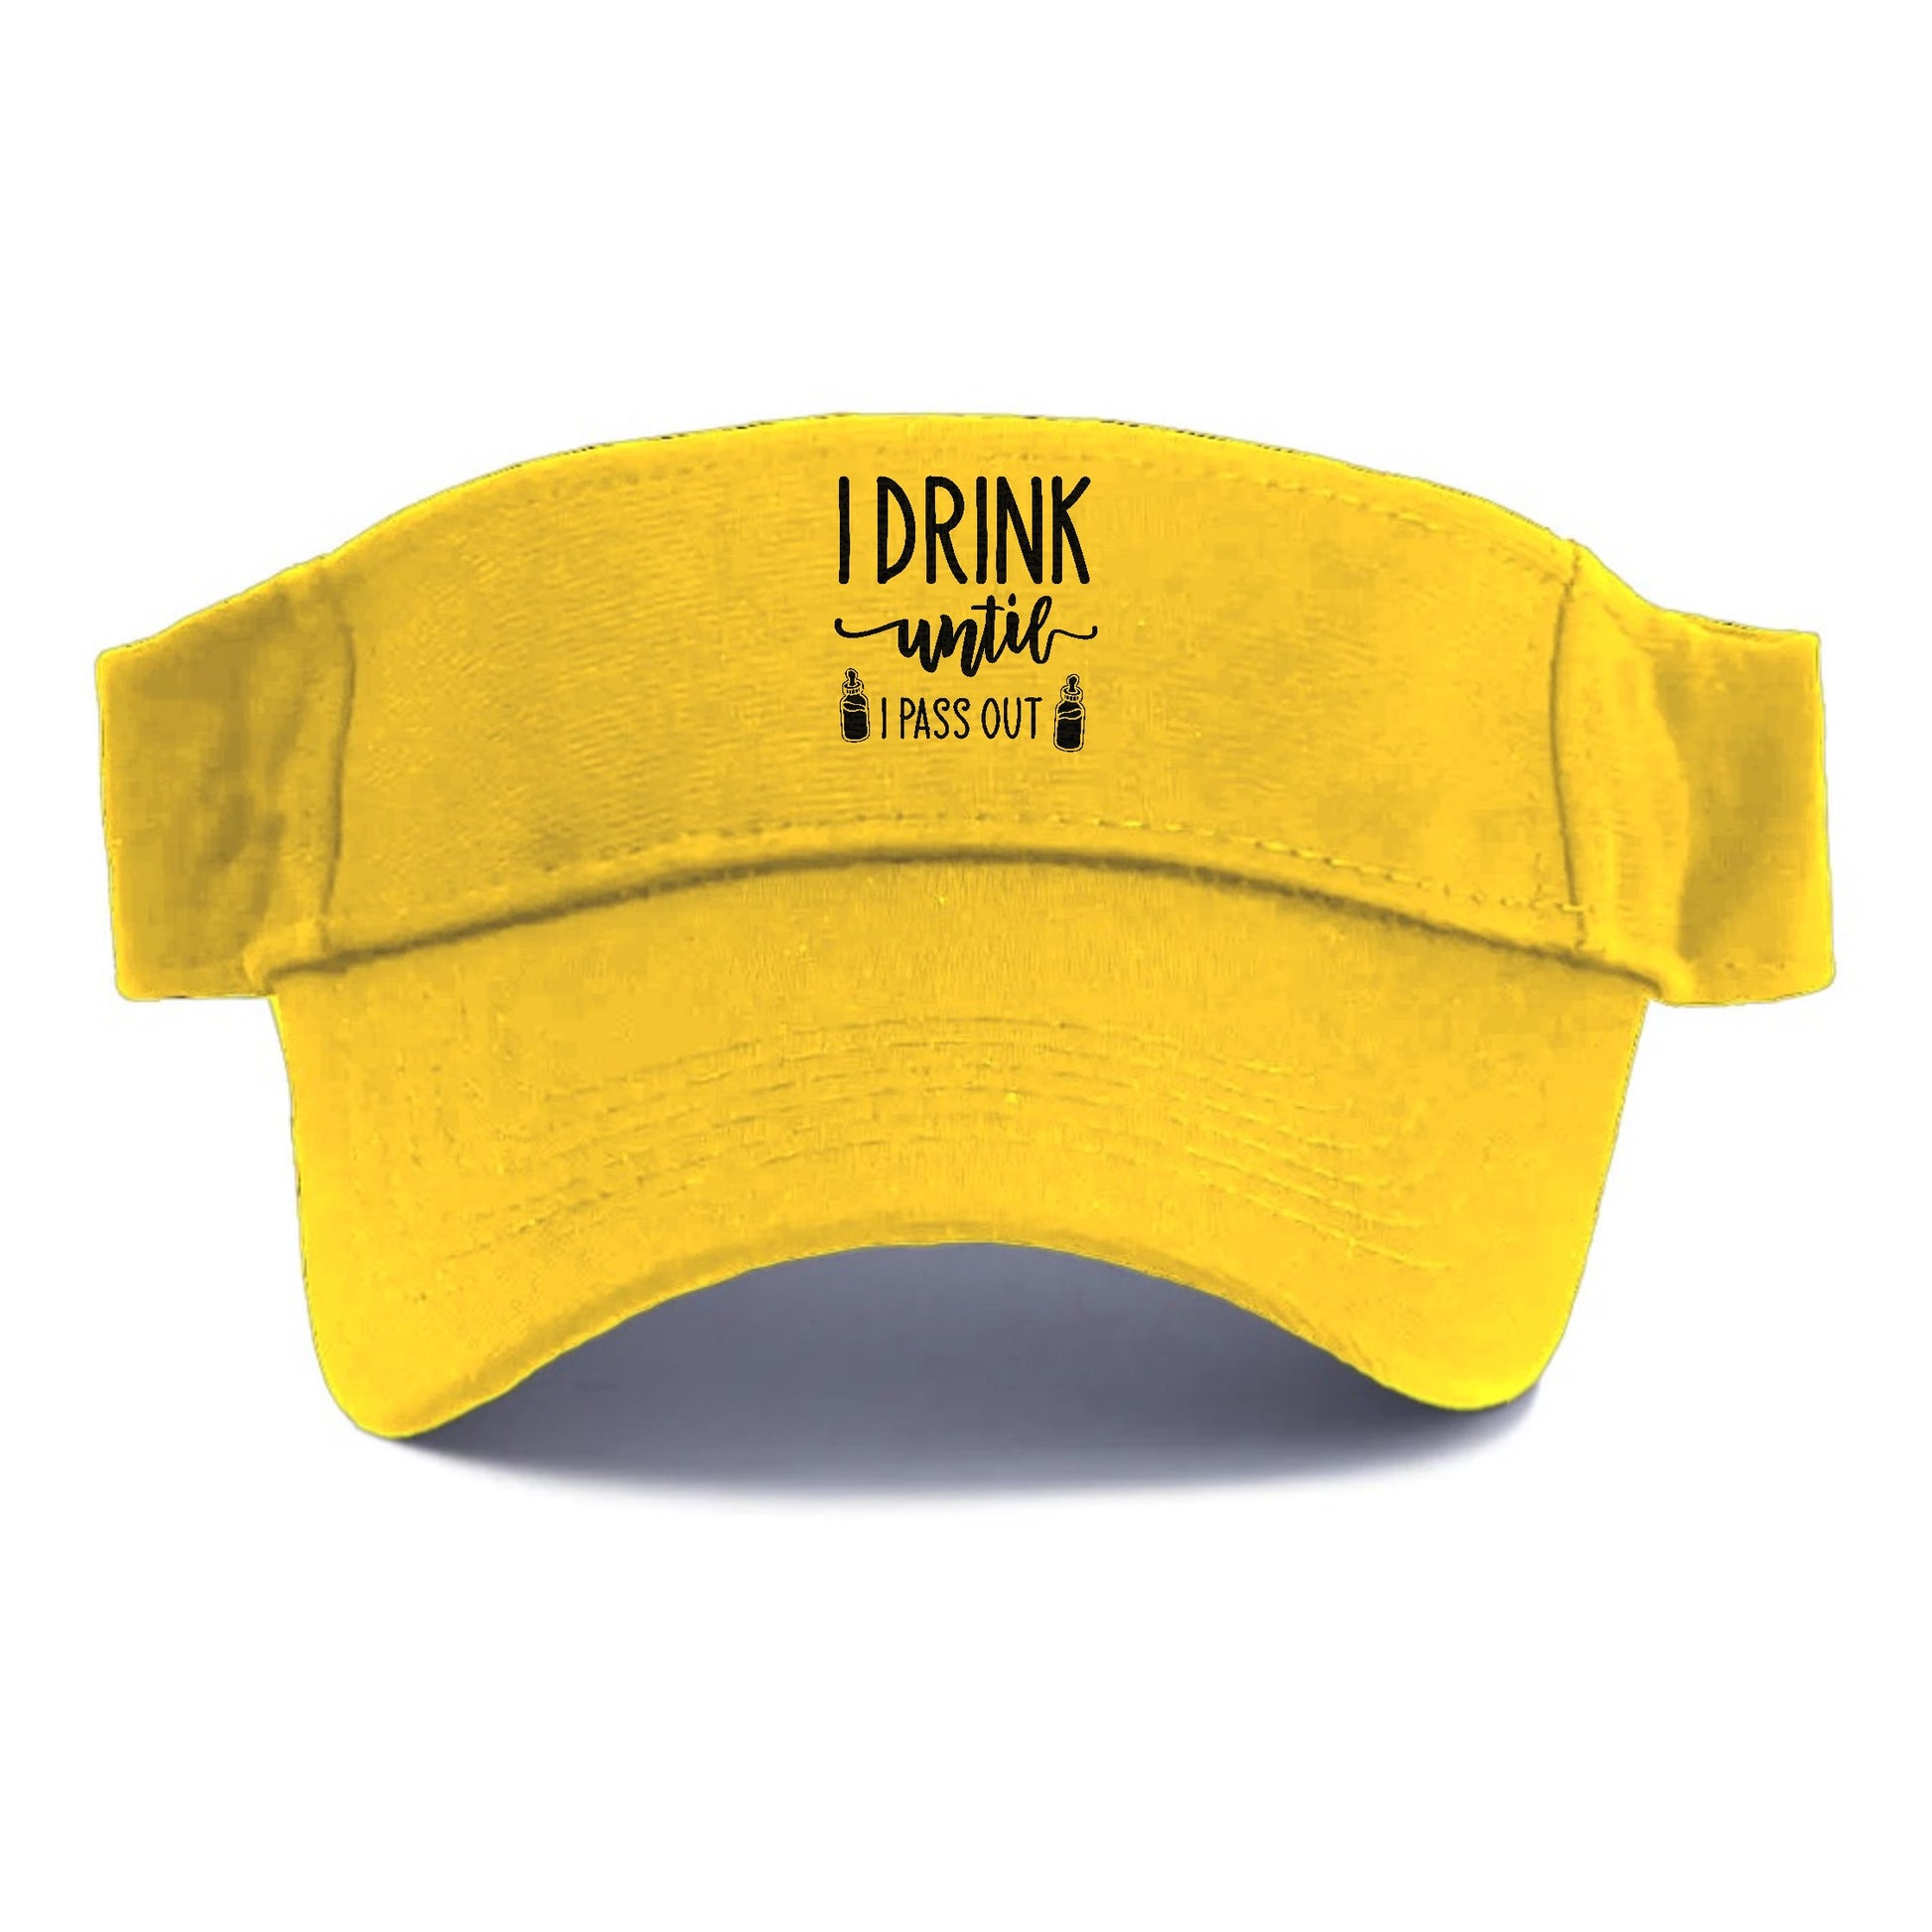 I drink until i pass out Hat